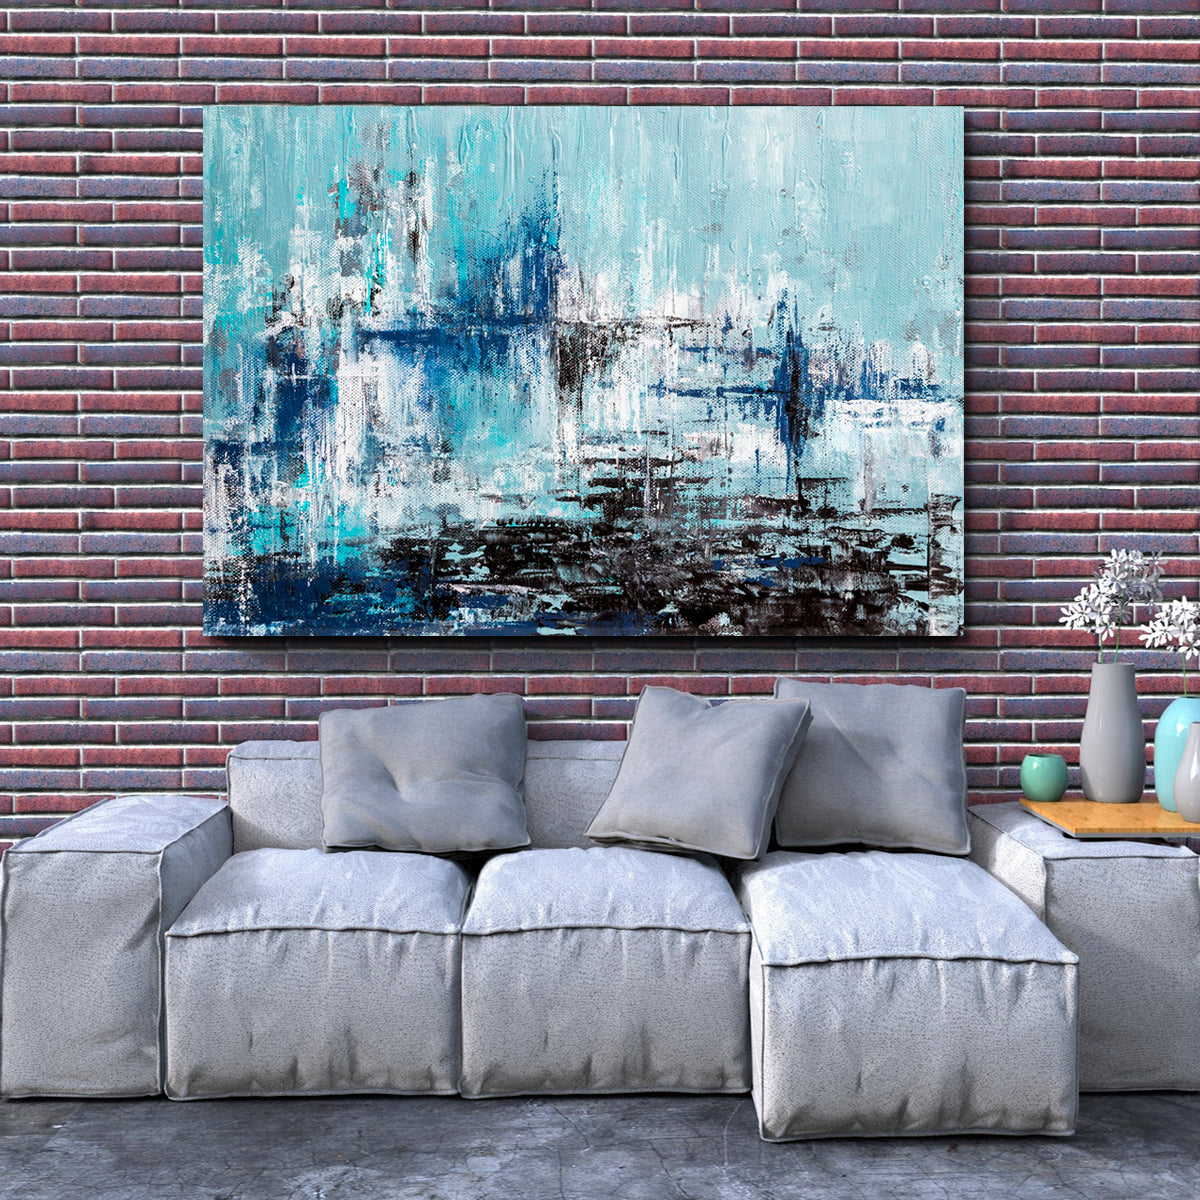 GRUNGE Modern Blue Abstract Acrylic Brush Stroke Painting Abstract Art Print Artesty 1 panel 24" x 16" 